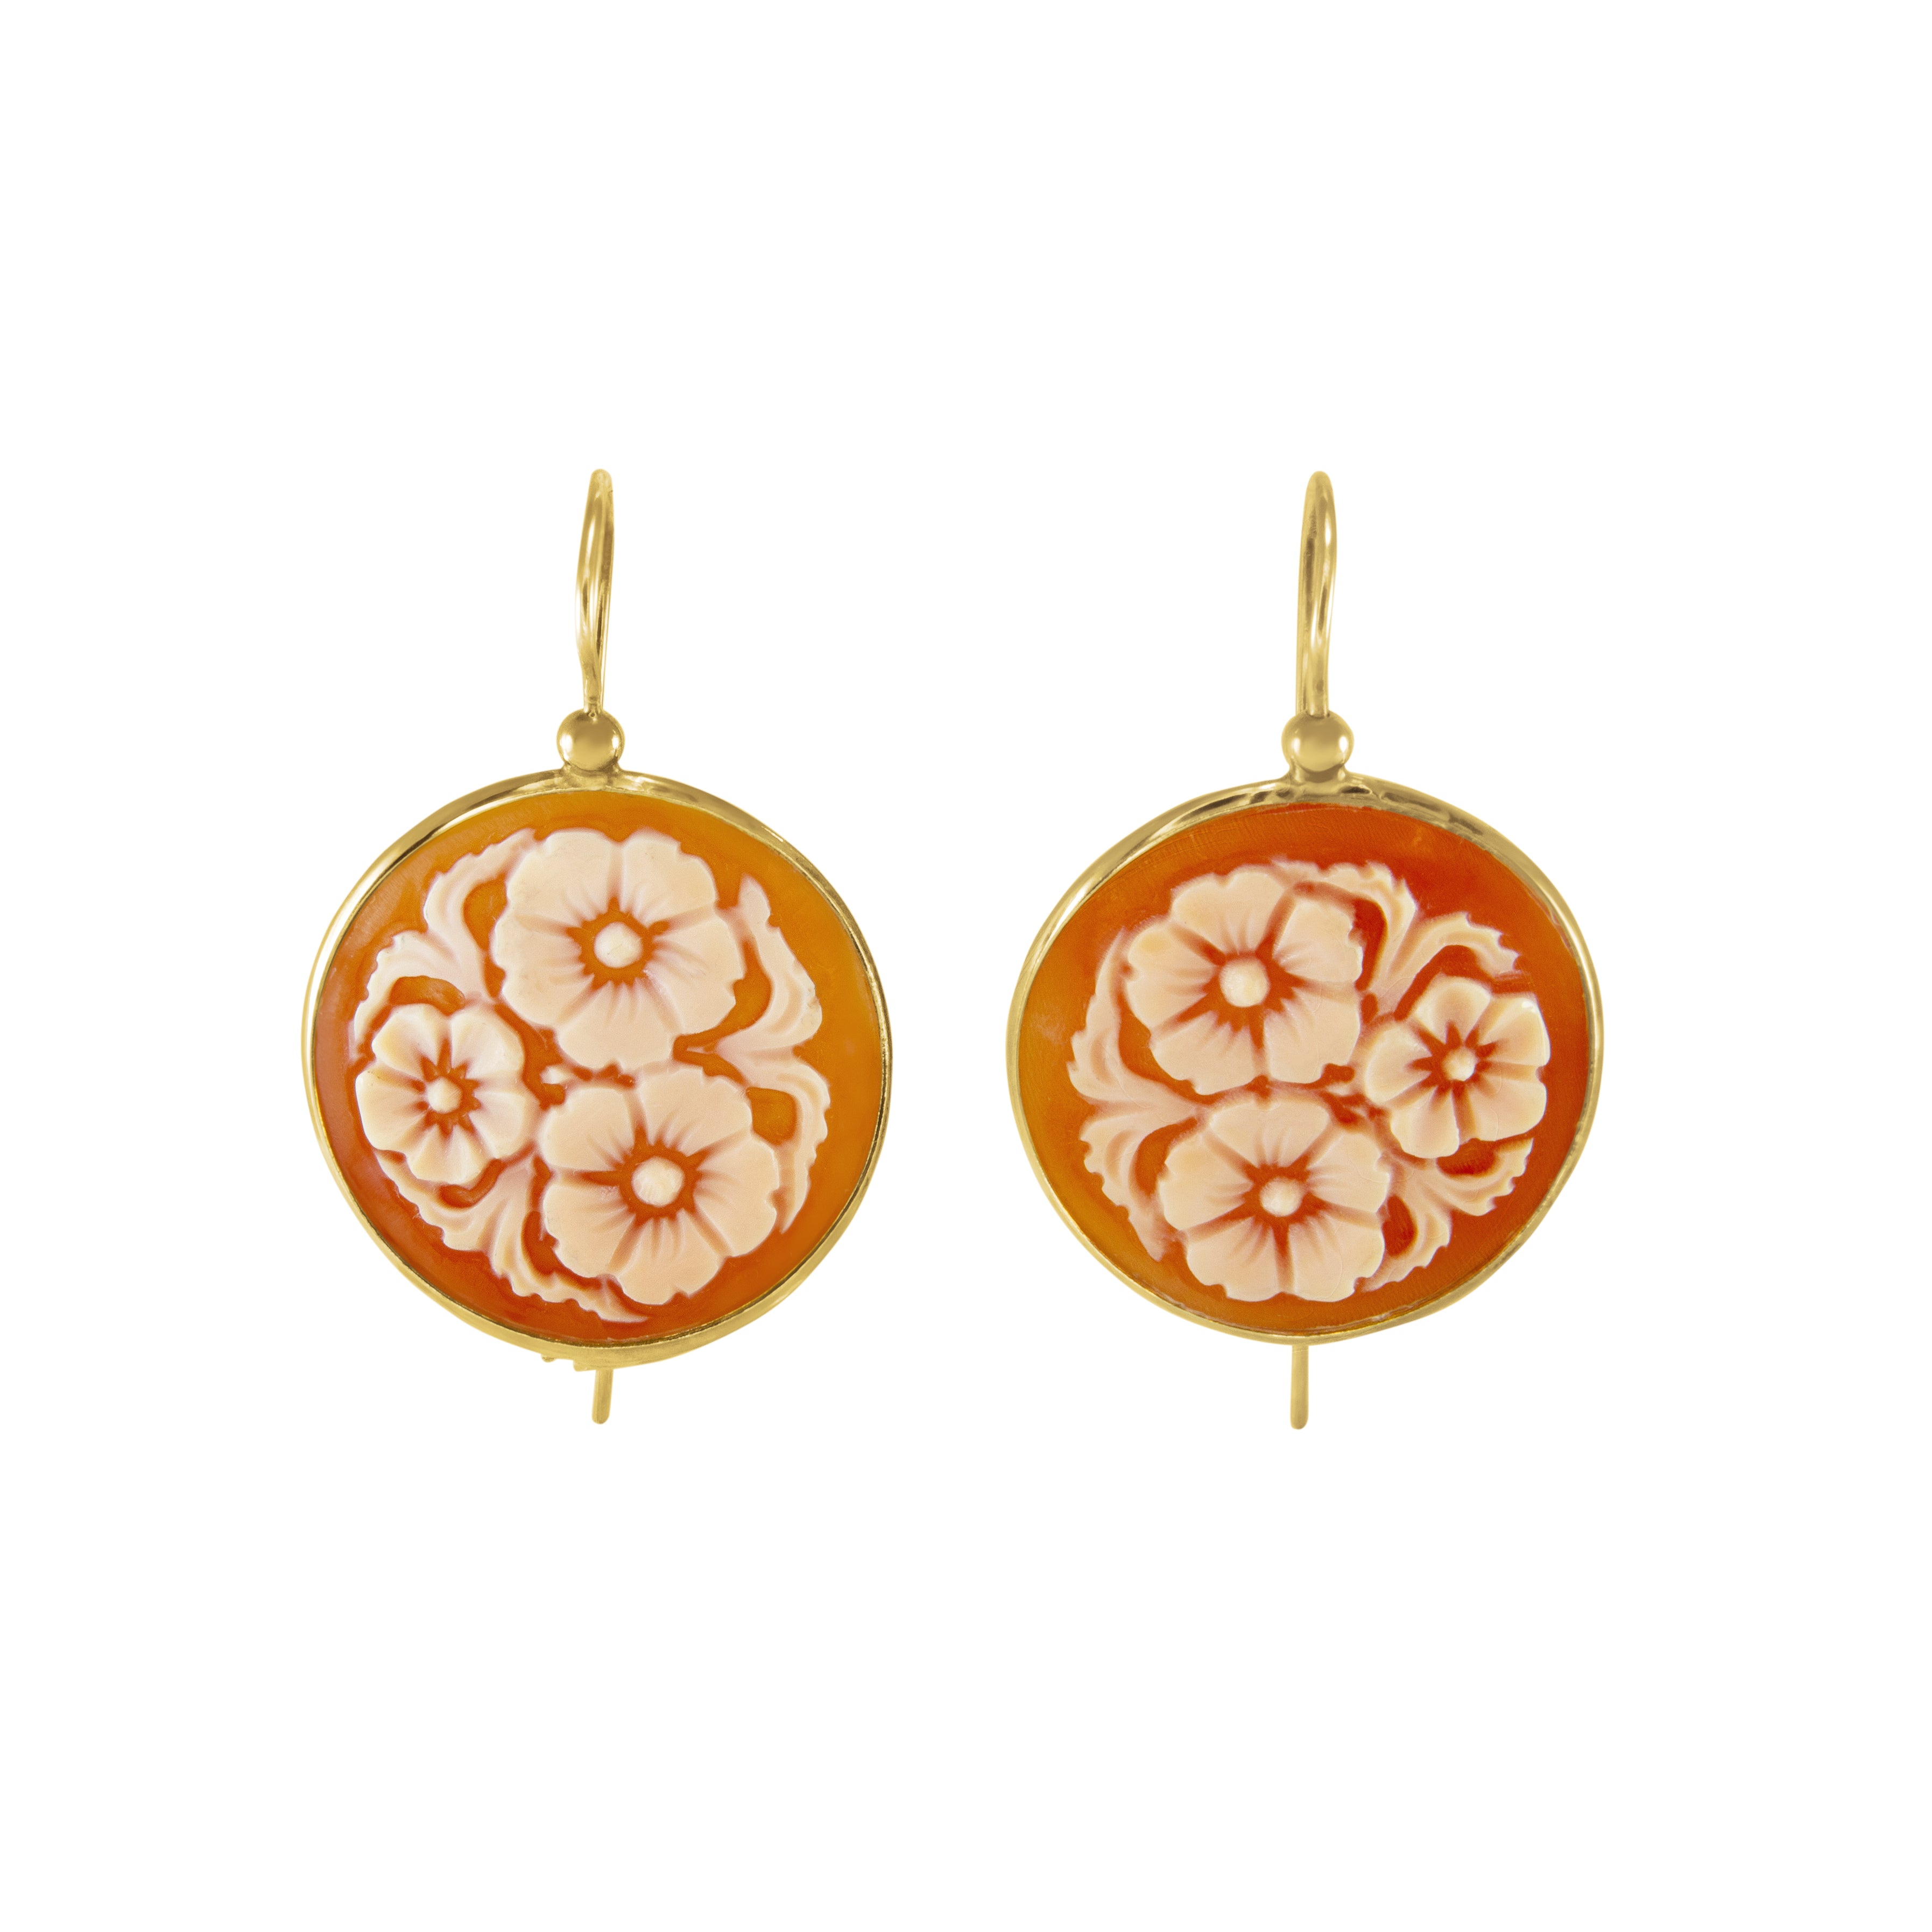 Small Round Cameo Flower Earrings - Yellow Gold